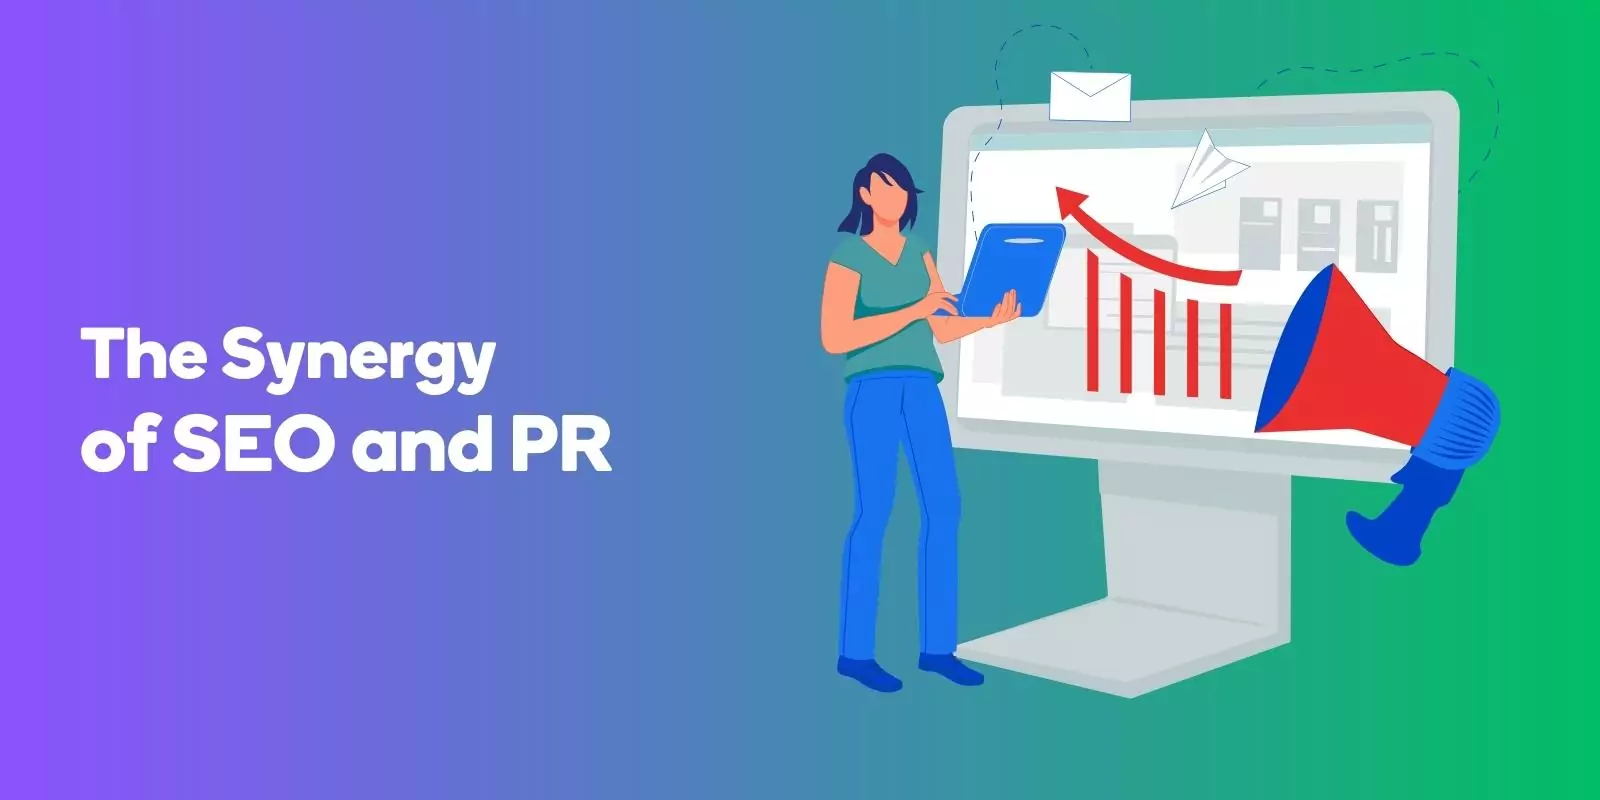 The Synergy of SEO and PR